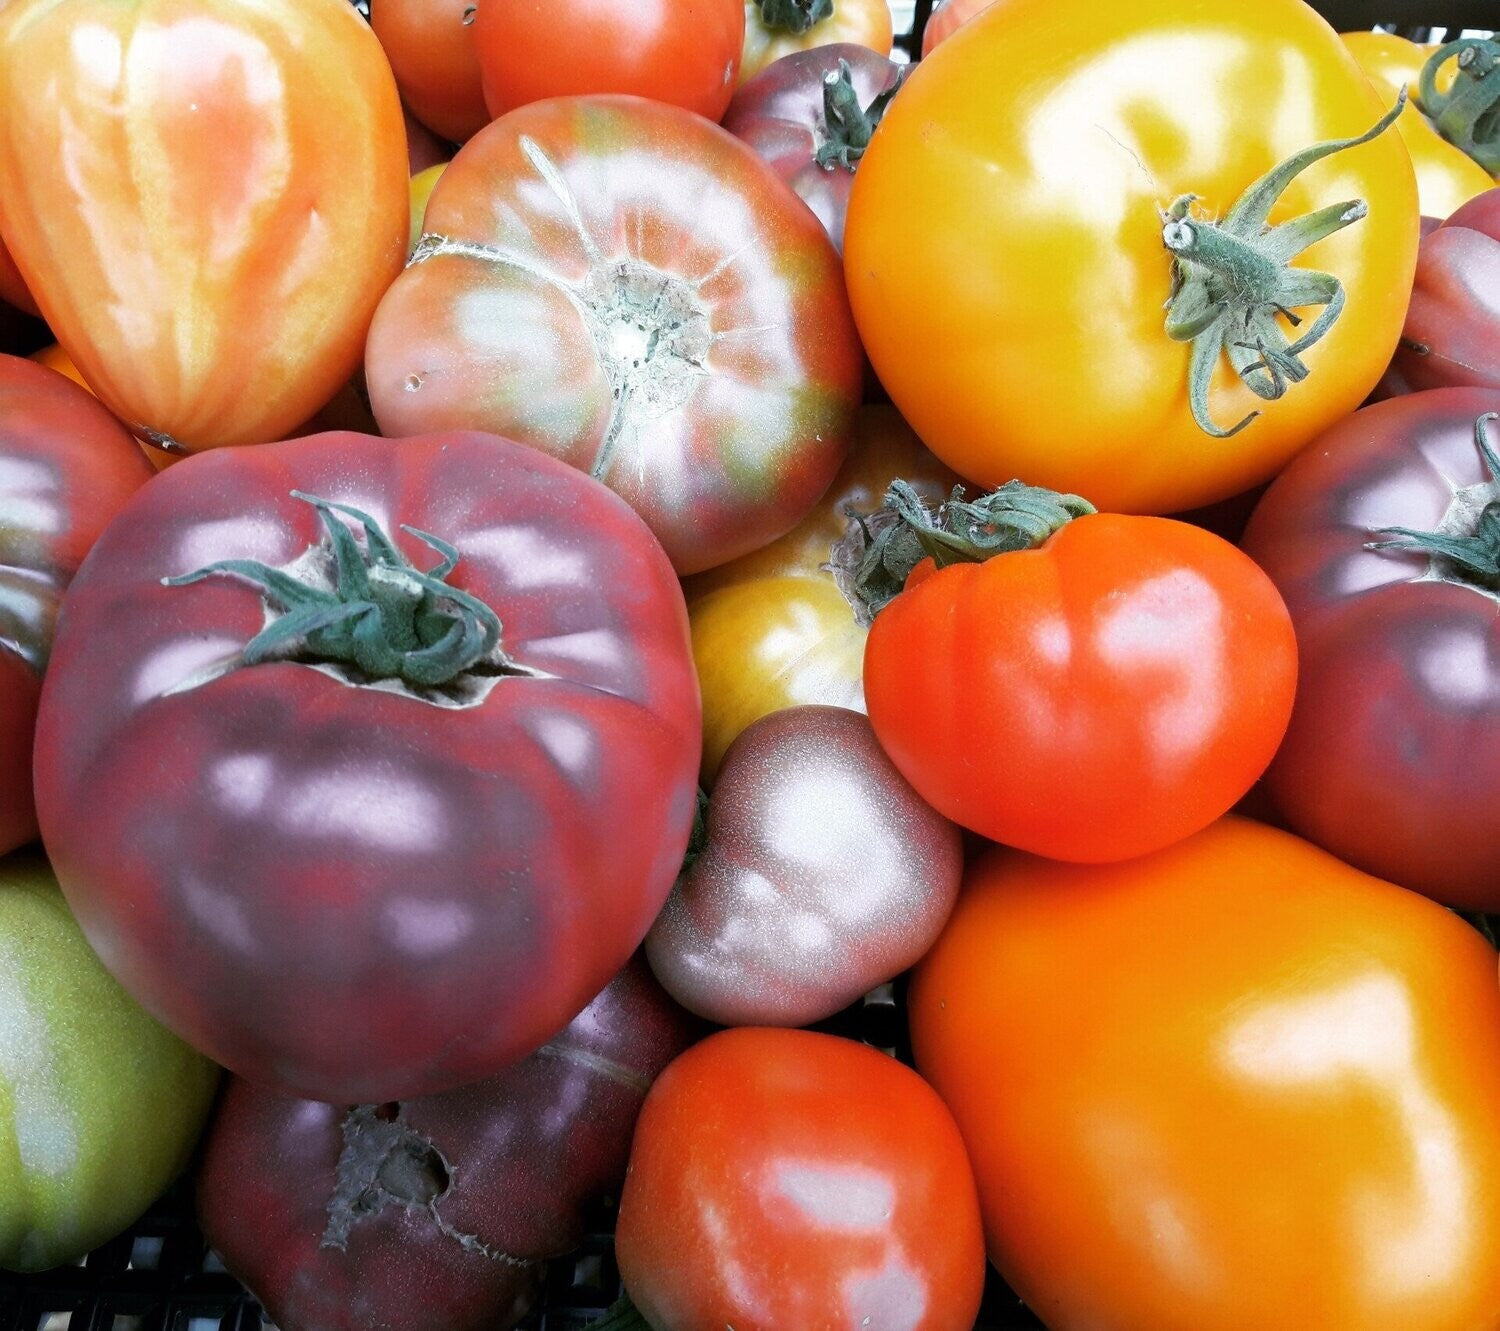 10 Questions With: Tomato Revolution